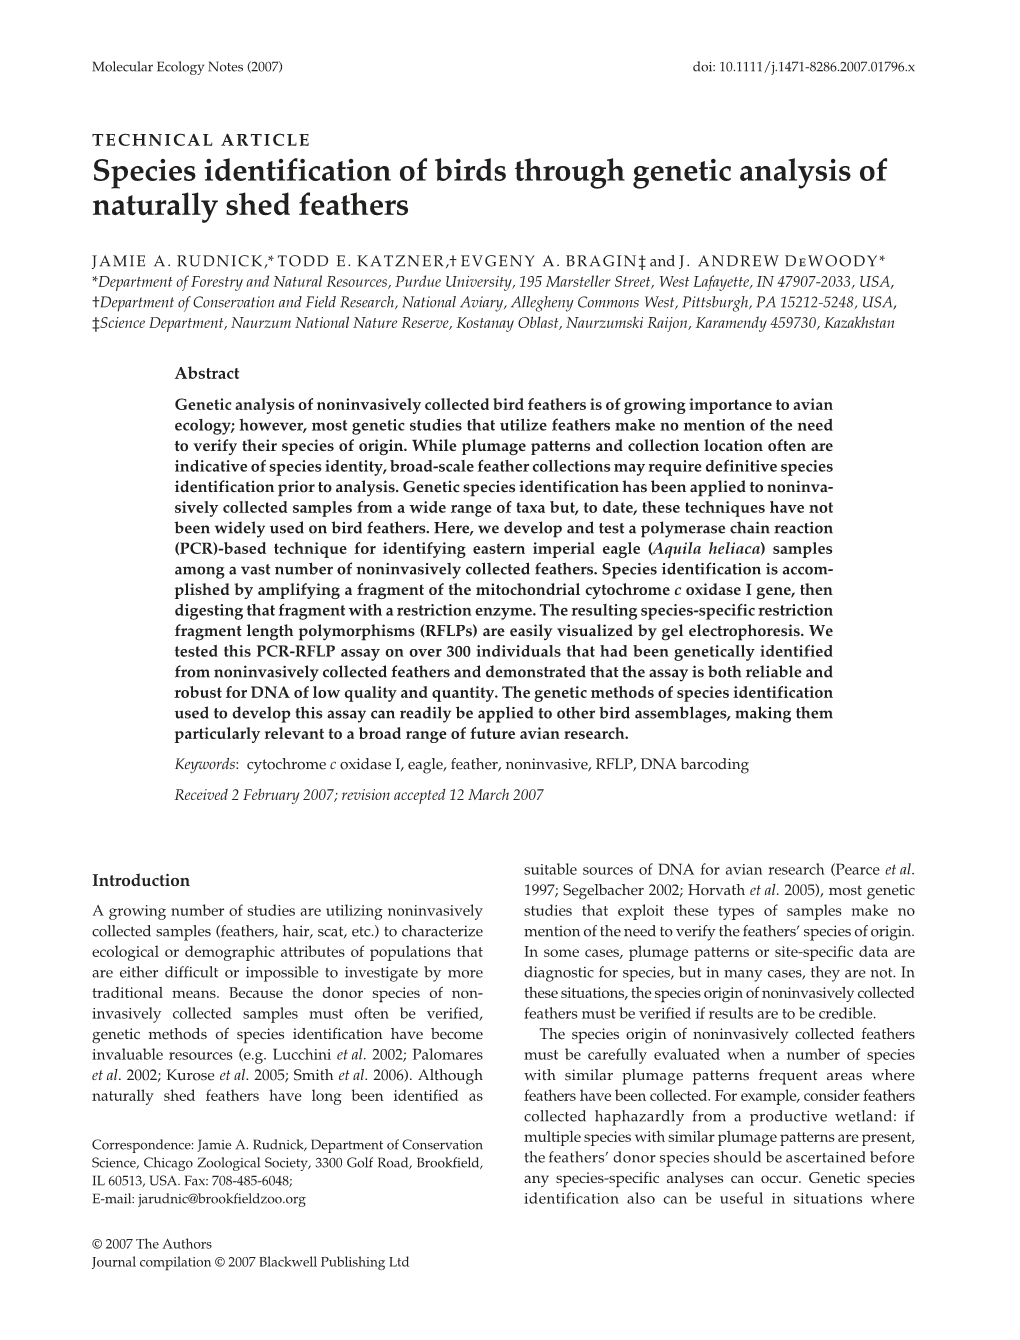 Species Identification of Birds Through Genetic Analysis of Naturally Shed Feathers